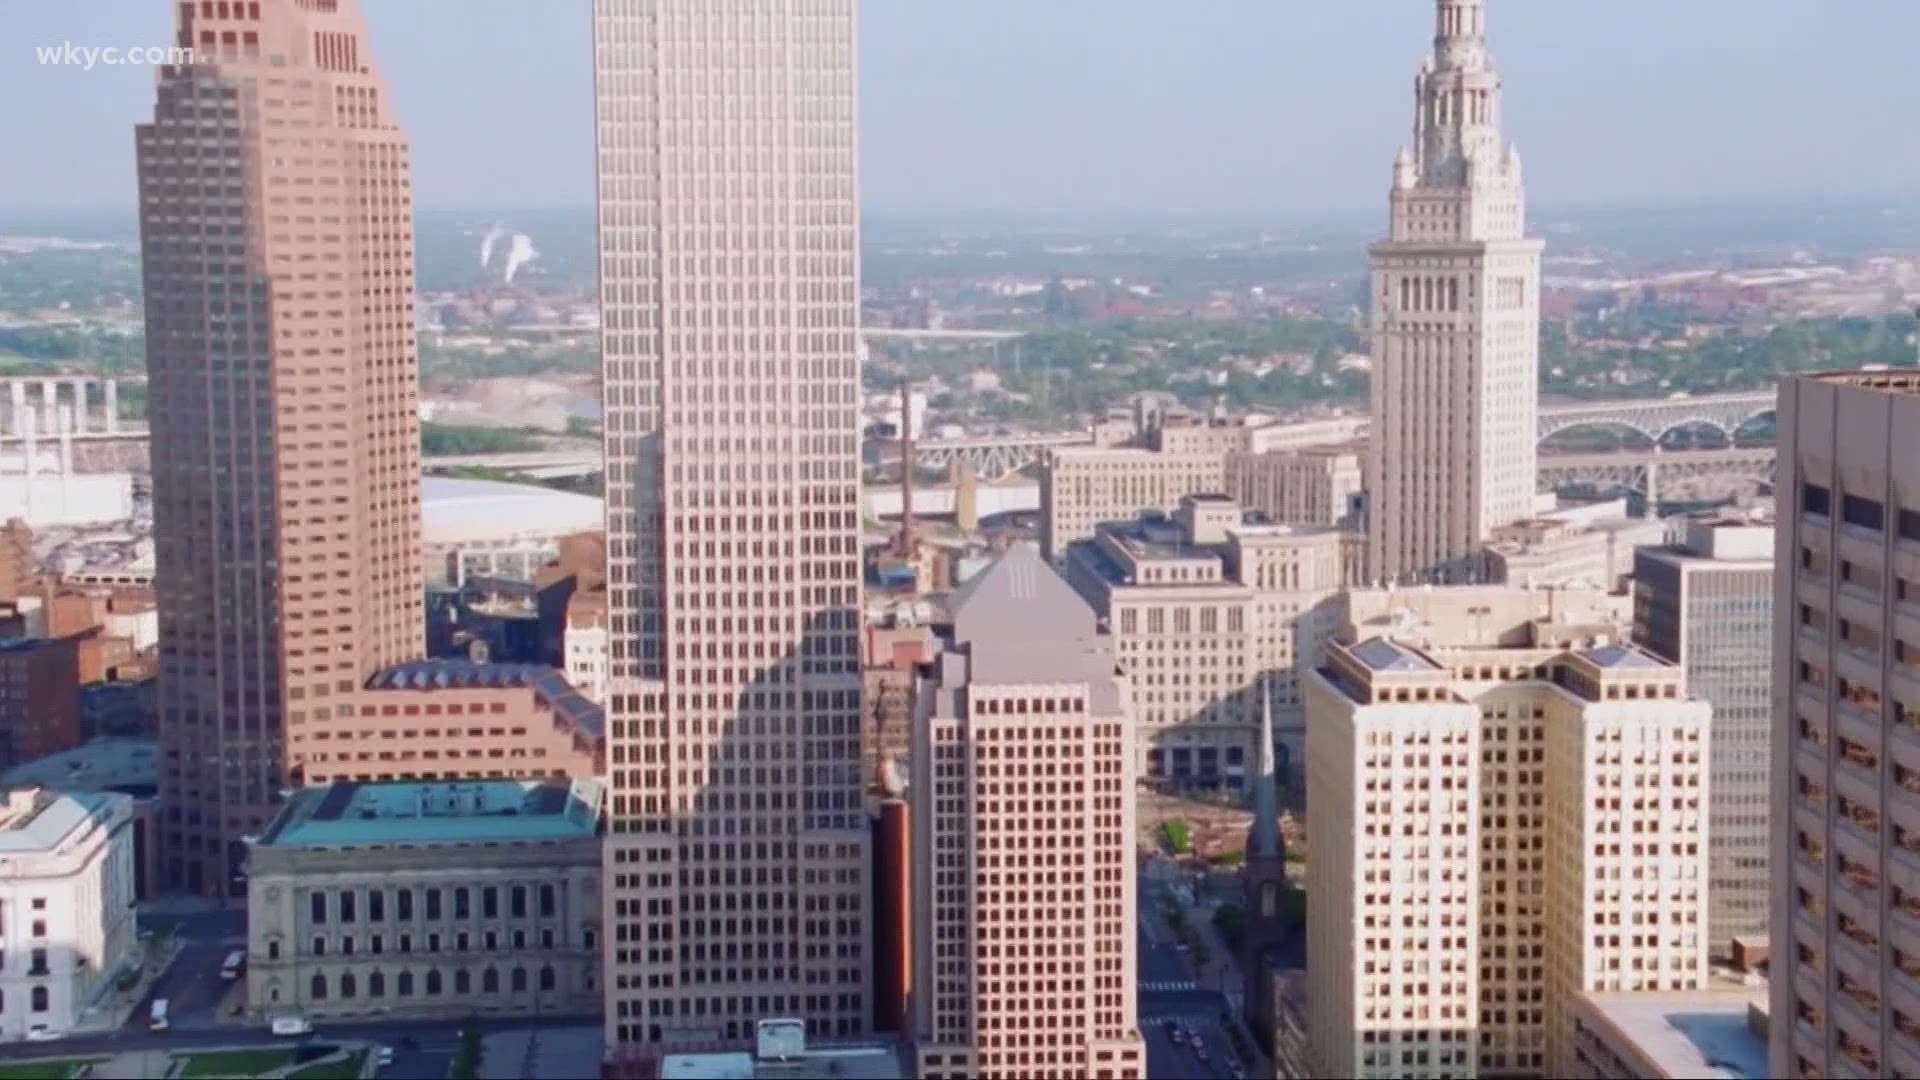 NBC's Sam Brock has Cleveland roots. As part of TODAY's "Reopening America" series, Sam takes a look at how our area is bouncing back from the pandemic.